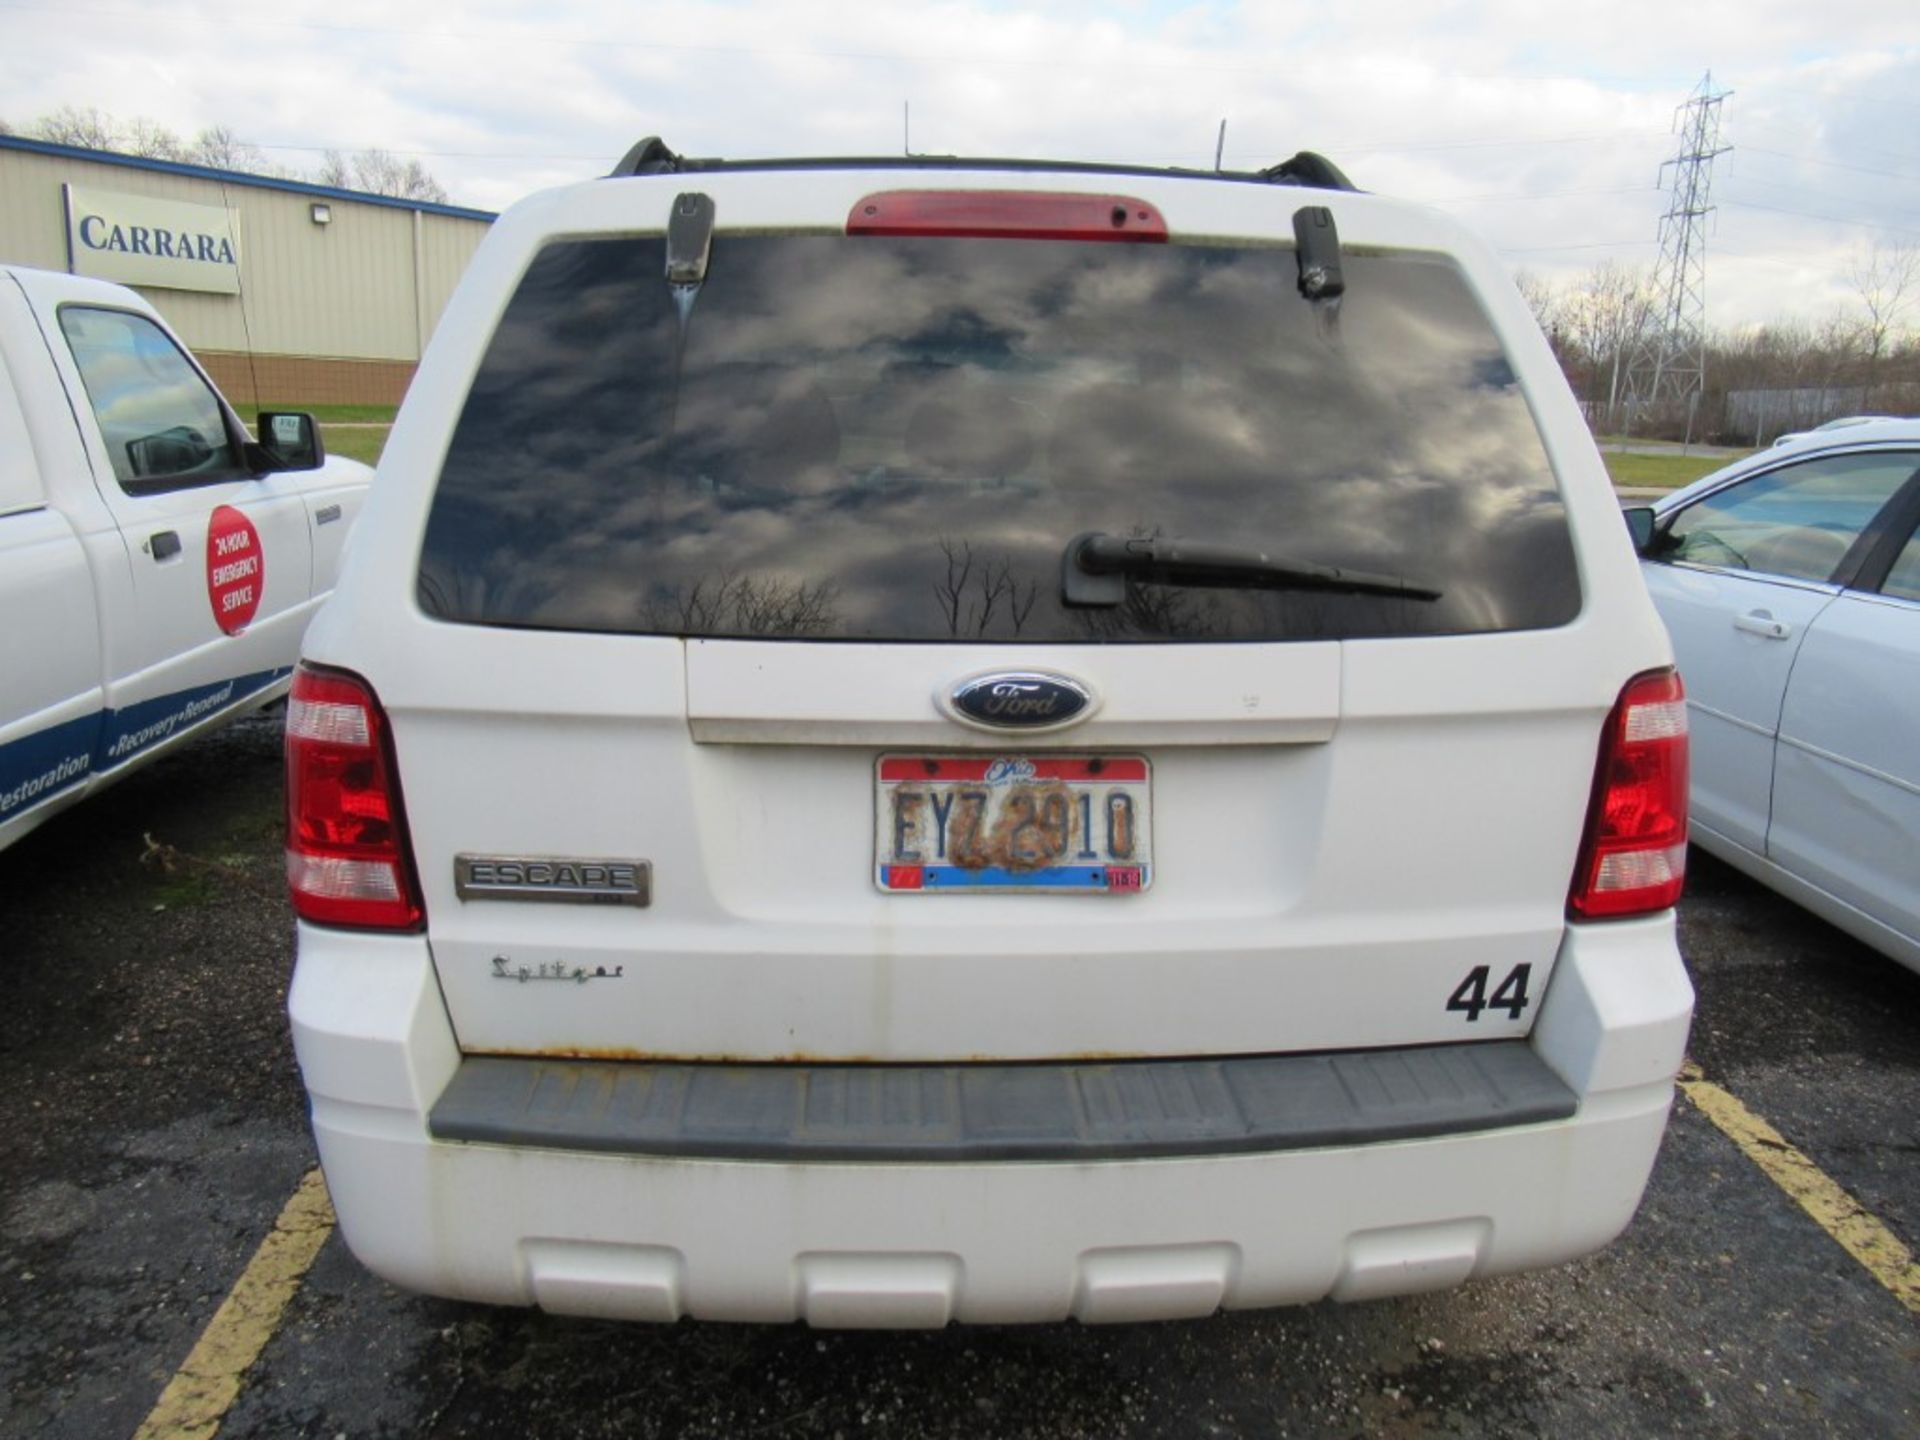 2008 Ford Escape XLT SUV , VIN 1FMCU02118KD90320, Automatic, Cruise Control, AC, PW, PL, PS, AM/FM/ - Image 6 of 31